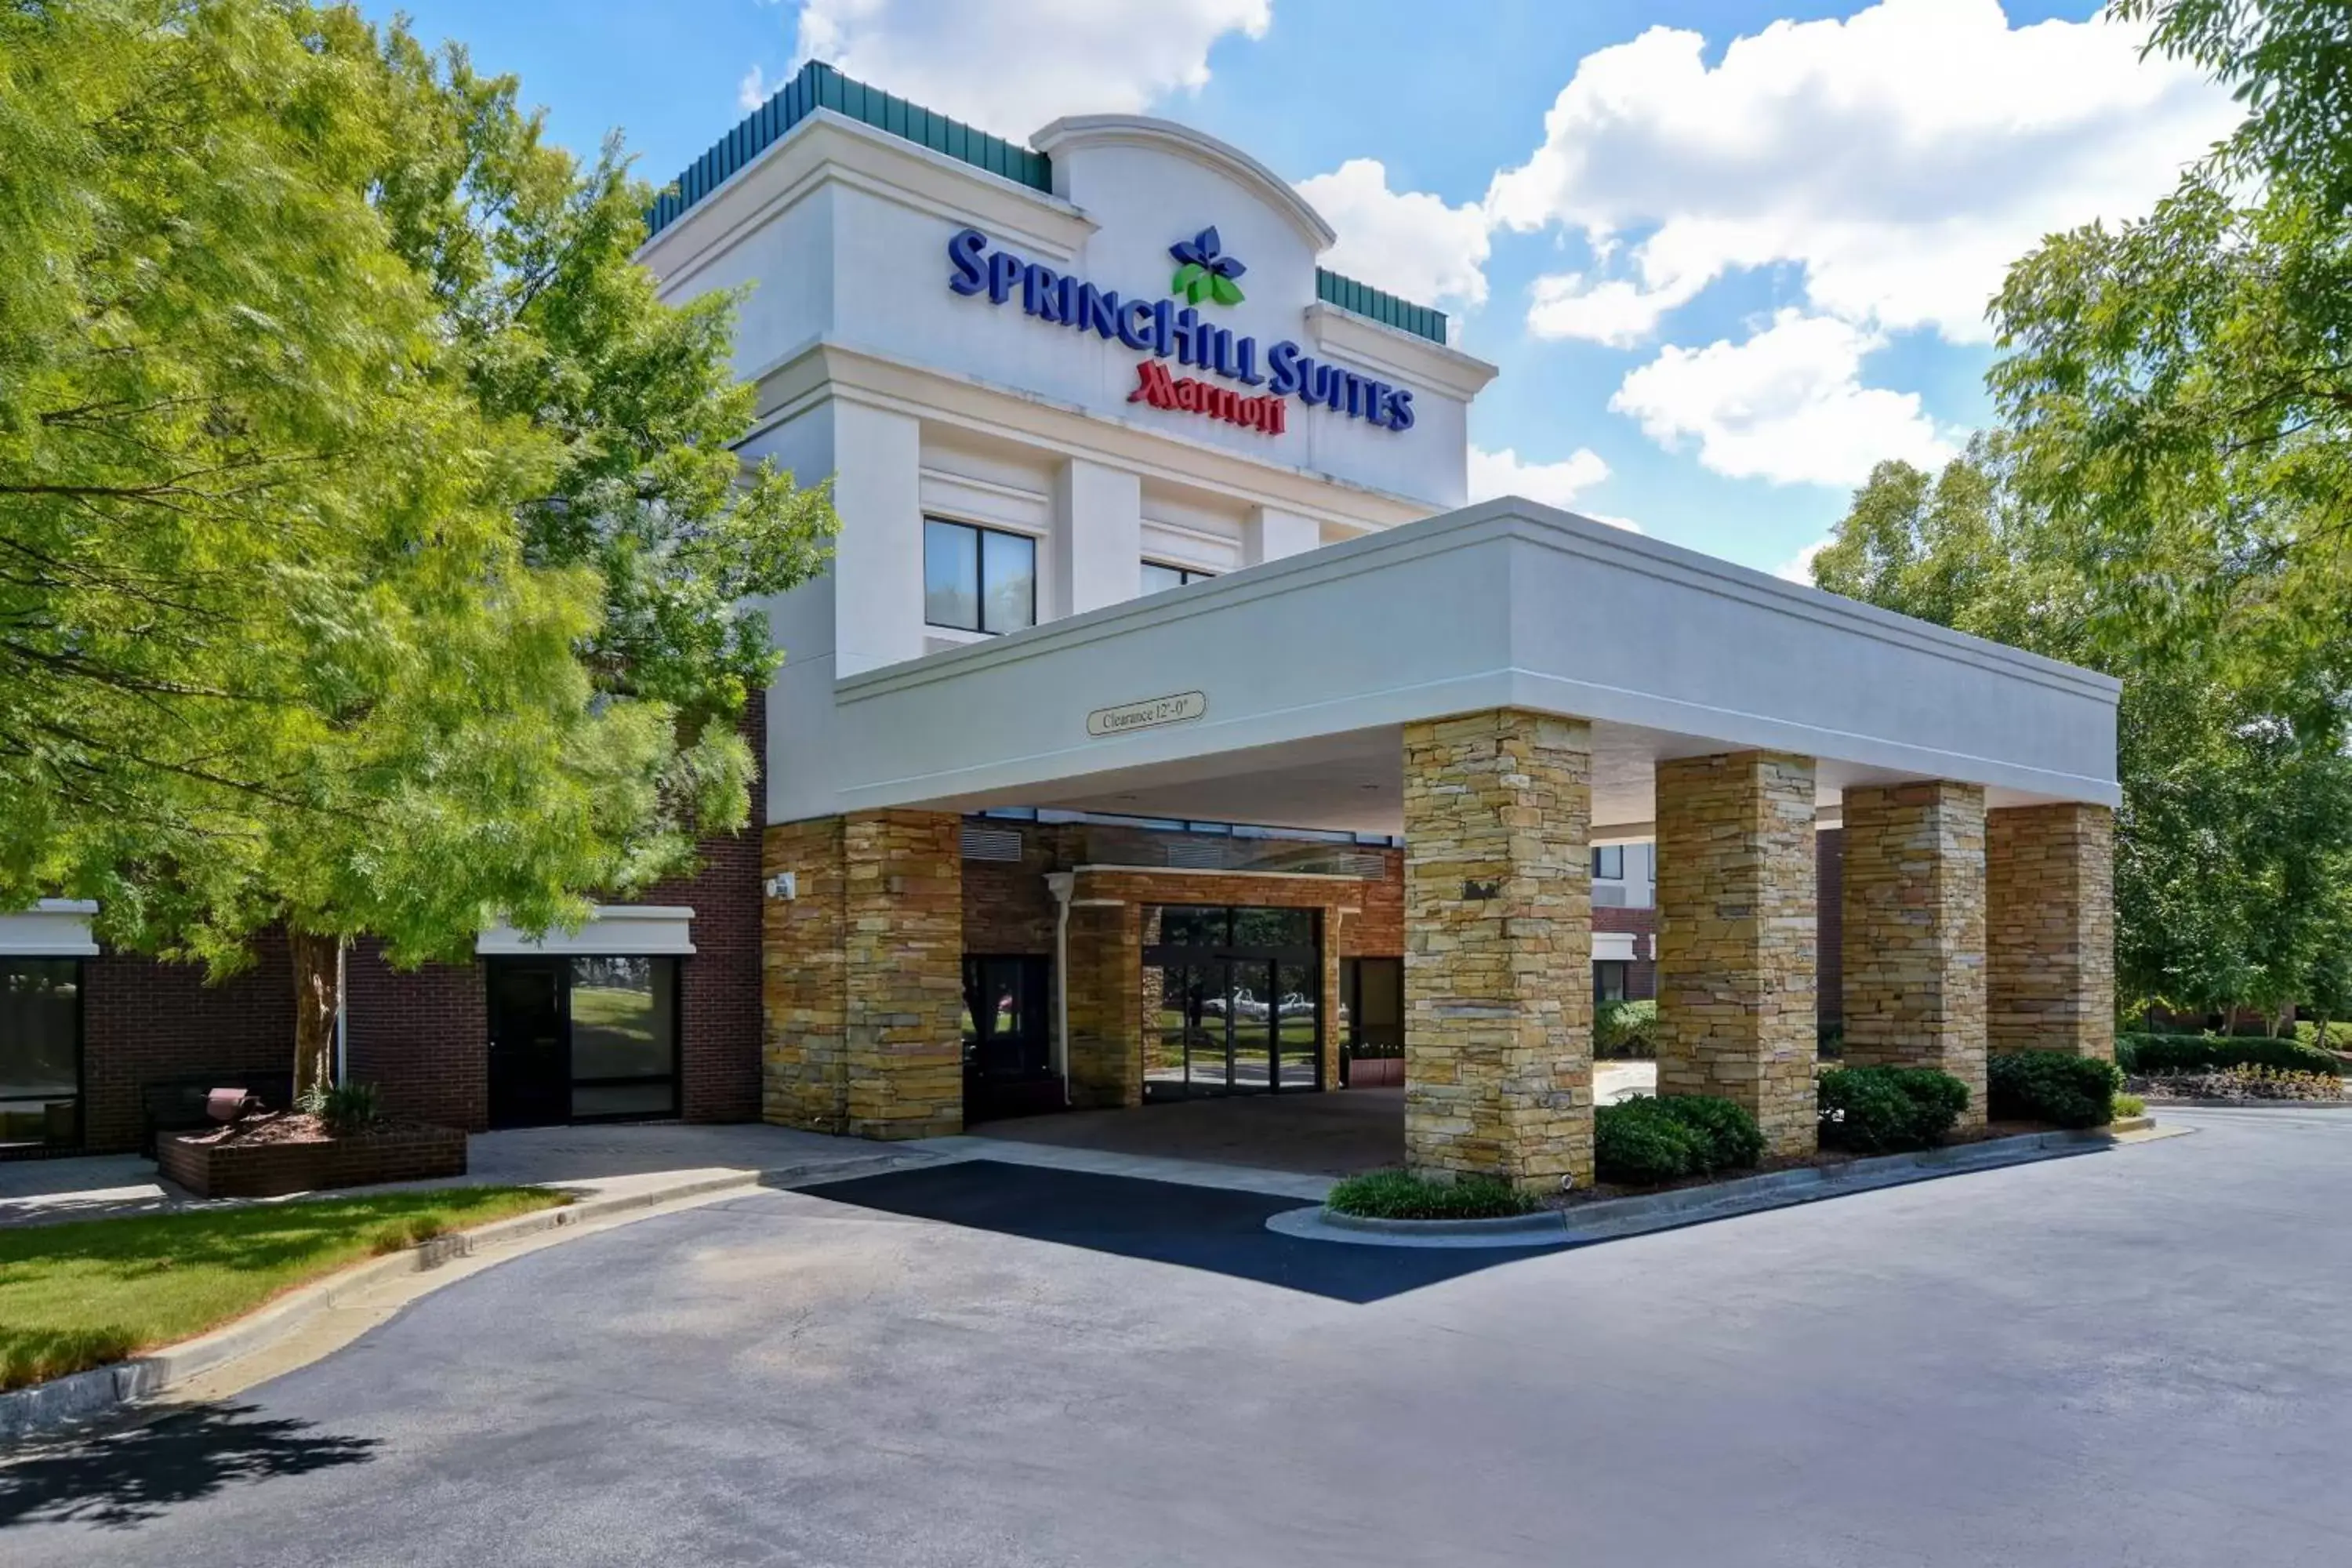 Property Building in SpringHill Suites by Marriott Atlanta Kennesaw